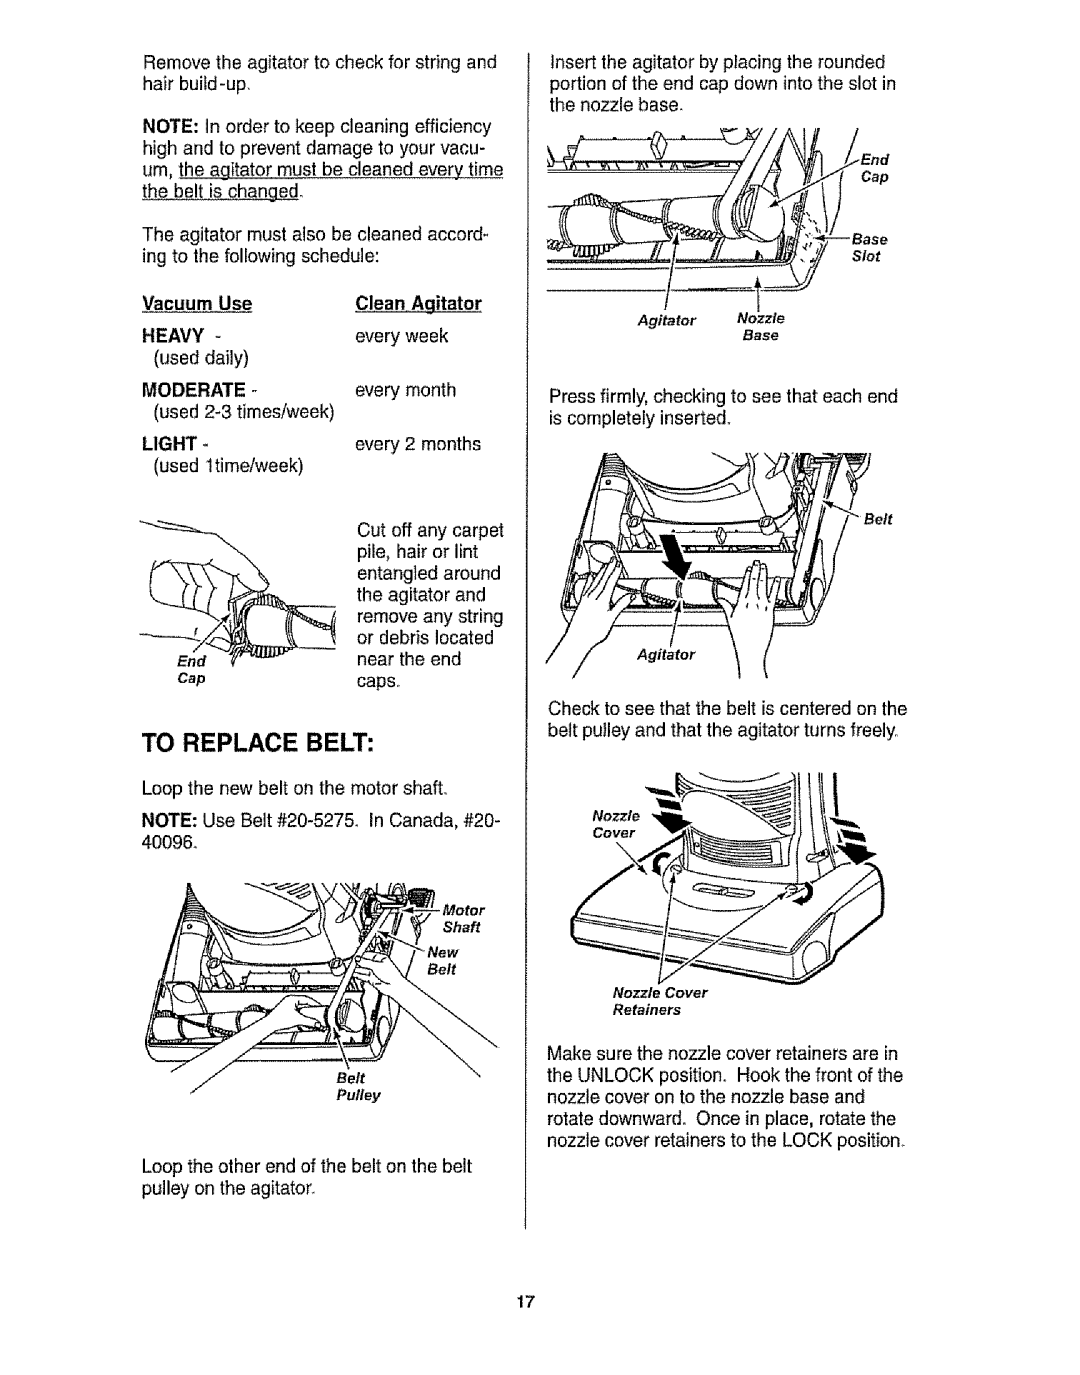 Kenmore 116.31721 owner manual To Replace Belt, Vacuum Use, Heavy, Moderate, used, Light 